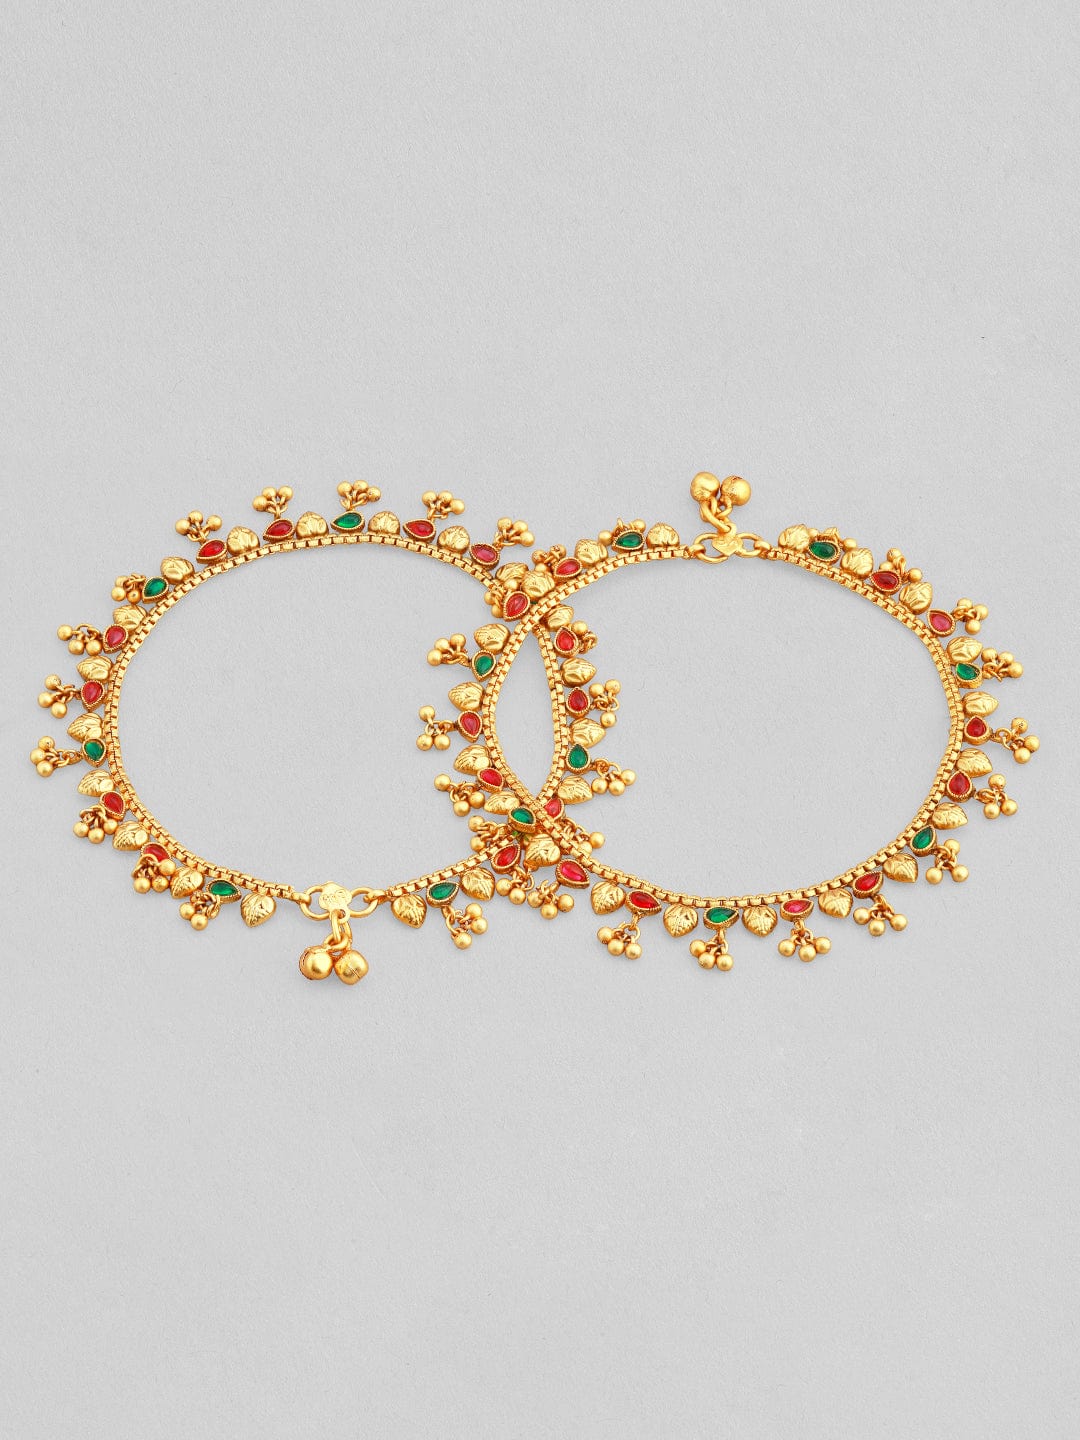 Rubans 24k Gold Plated Anklet With Red And Green Stones And Golden Beads. Anklets